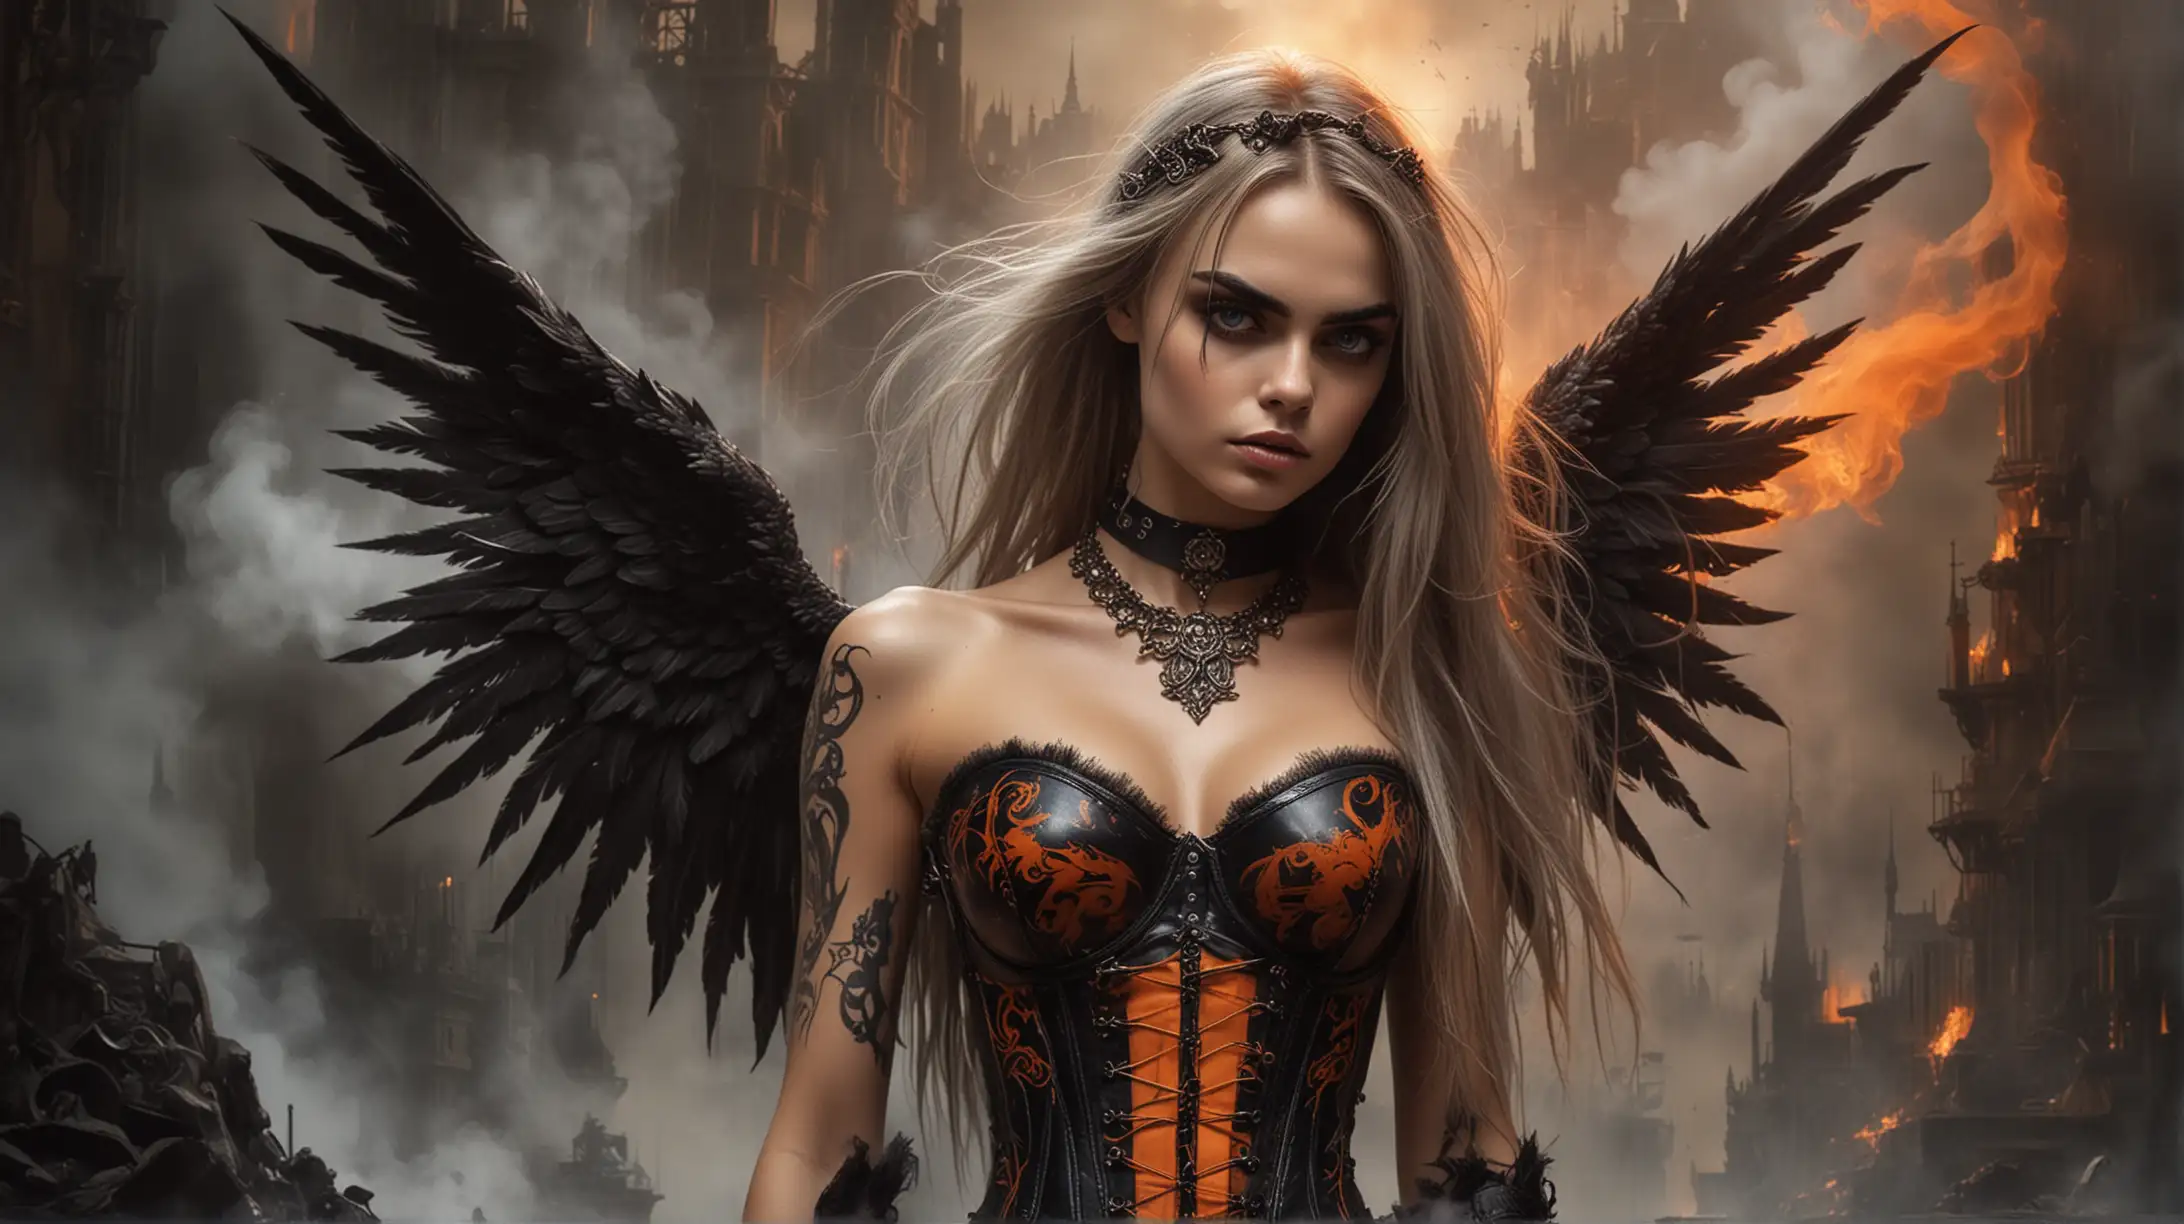 Cara Delevingne as sexy tattooed dark angel, She is wearing a orange and black strapless bone ornament corset, black wings, long hair, cloud of smoke and flames, Grzegorz Rosiński, Luis Royo, detailed background, dark fantasy, colorful comic book illustration, masterpiece